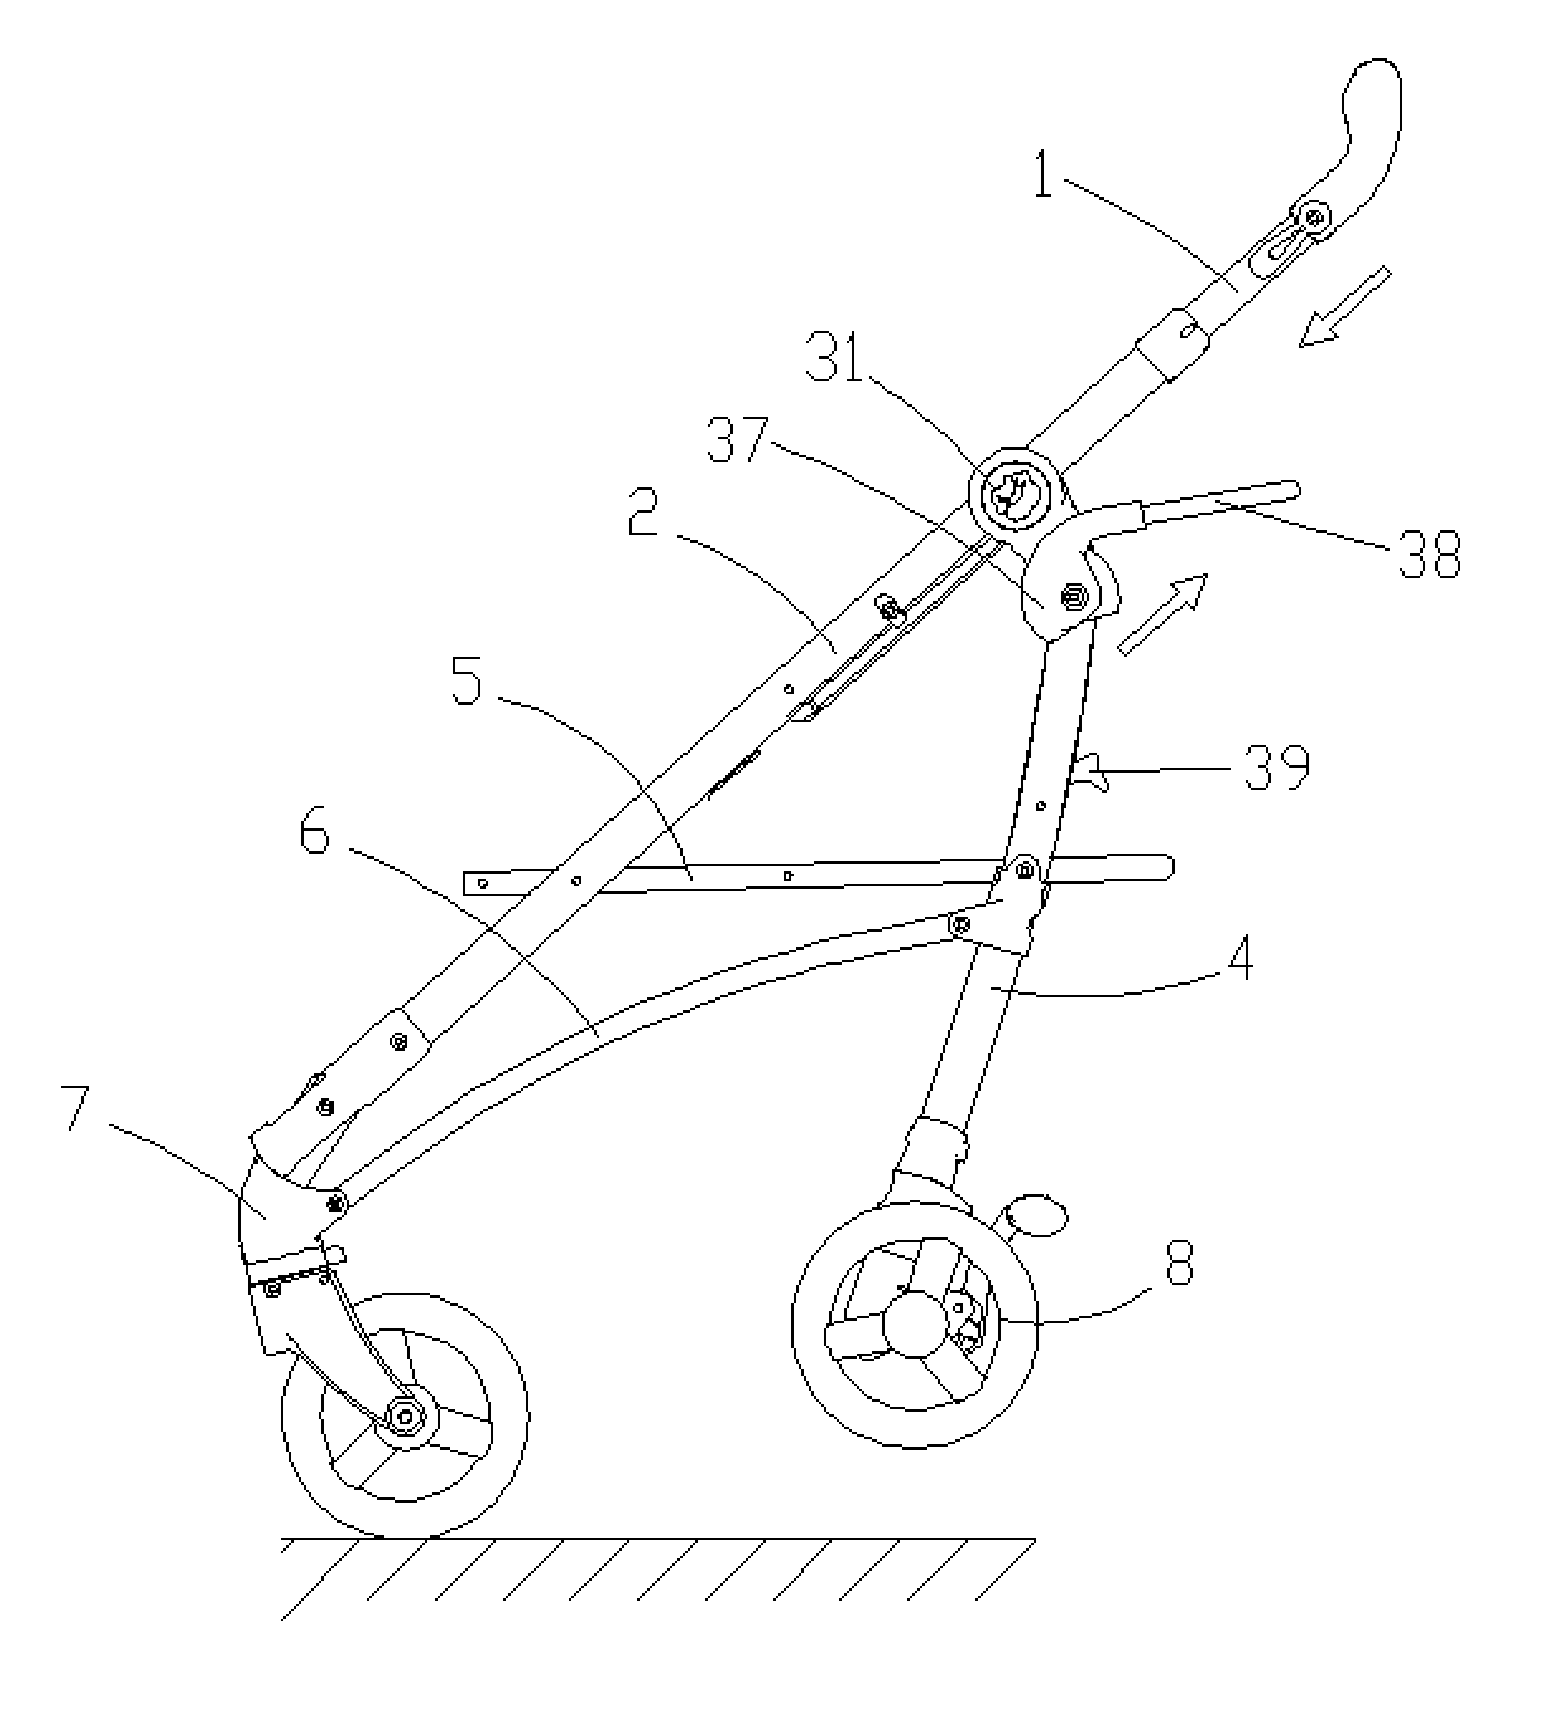 Stroller with pivotable front wheel assembly